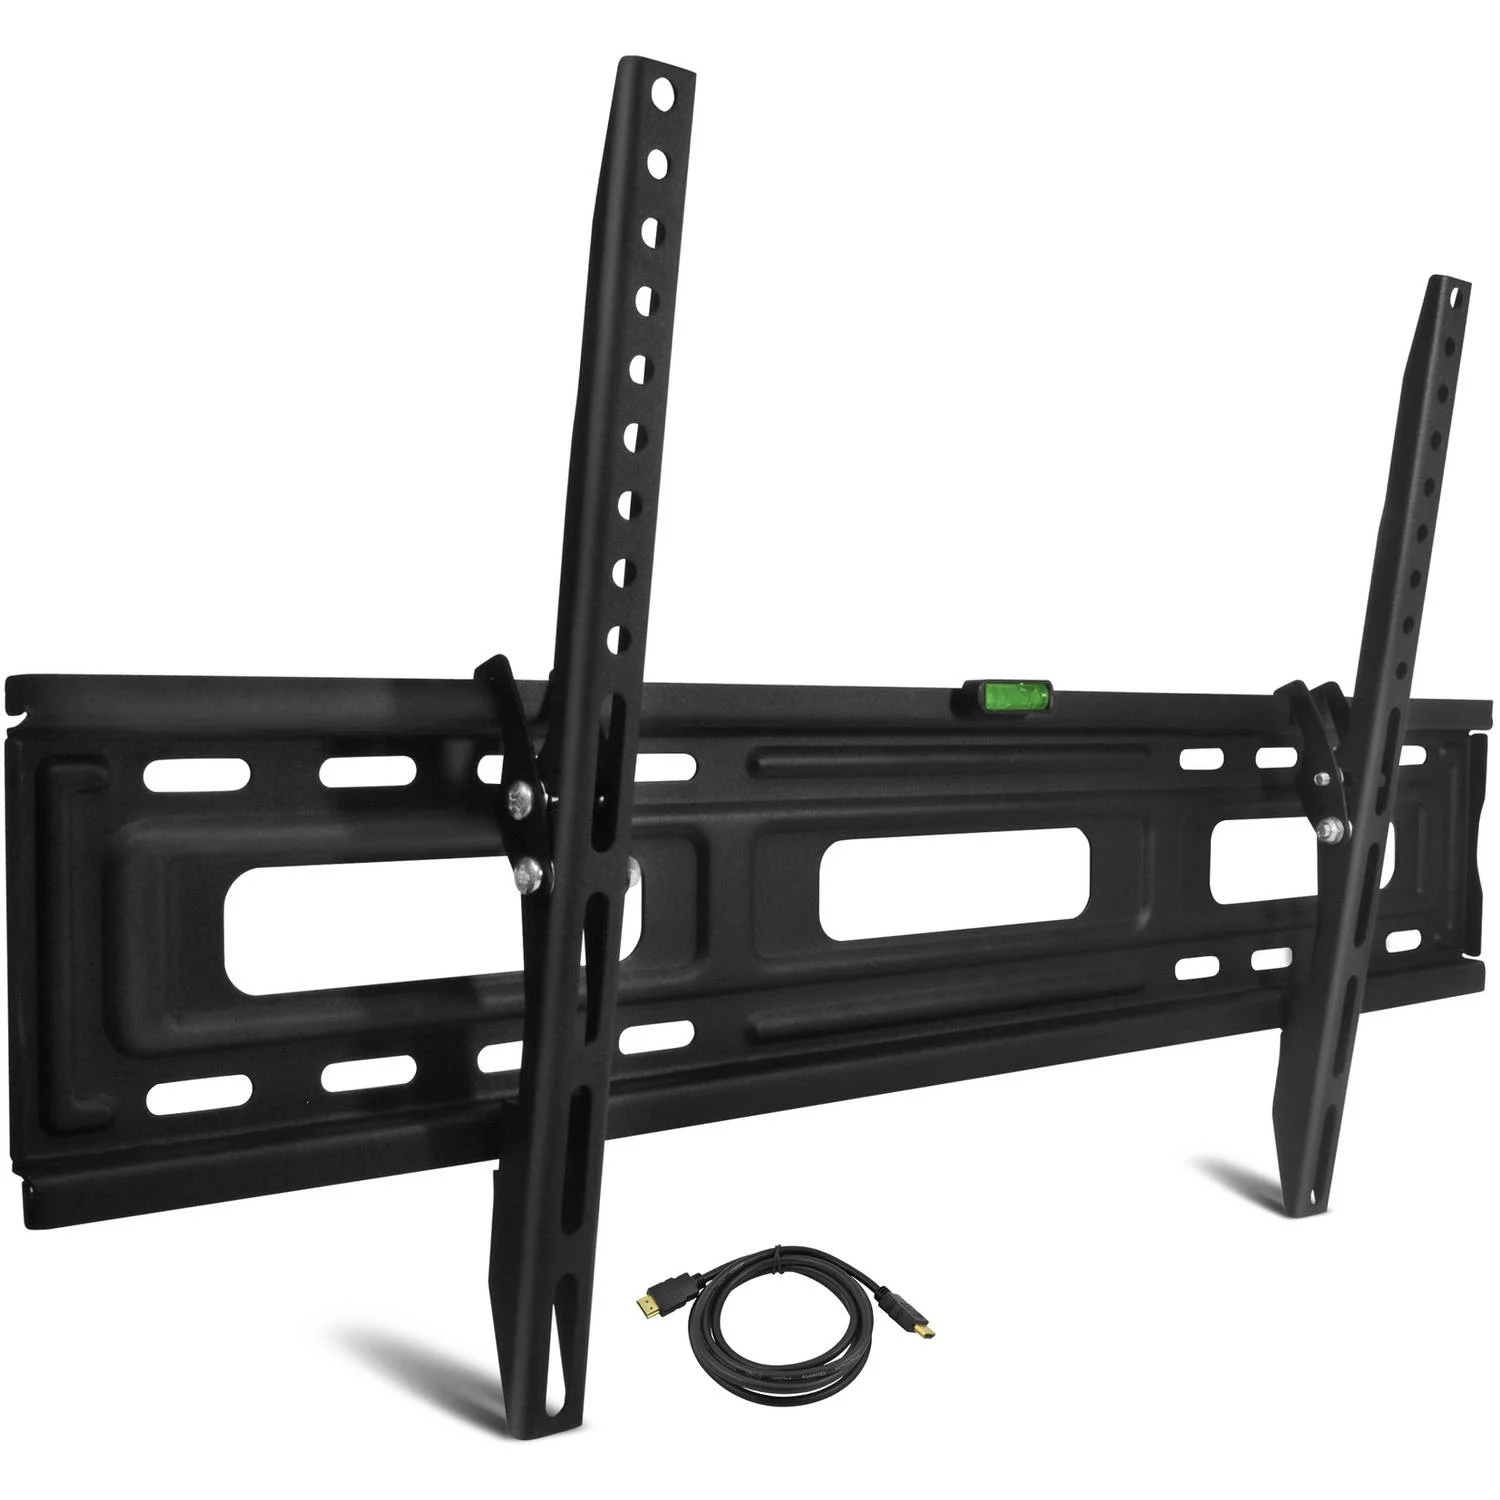 onn. Universal Tilting TV Wall Mount for 24" up to 84" TV Display with HDMI Cable, UL Certified VESA up to 700 x 400